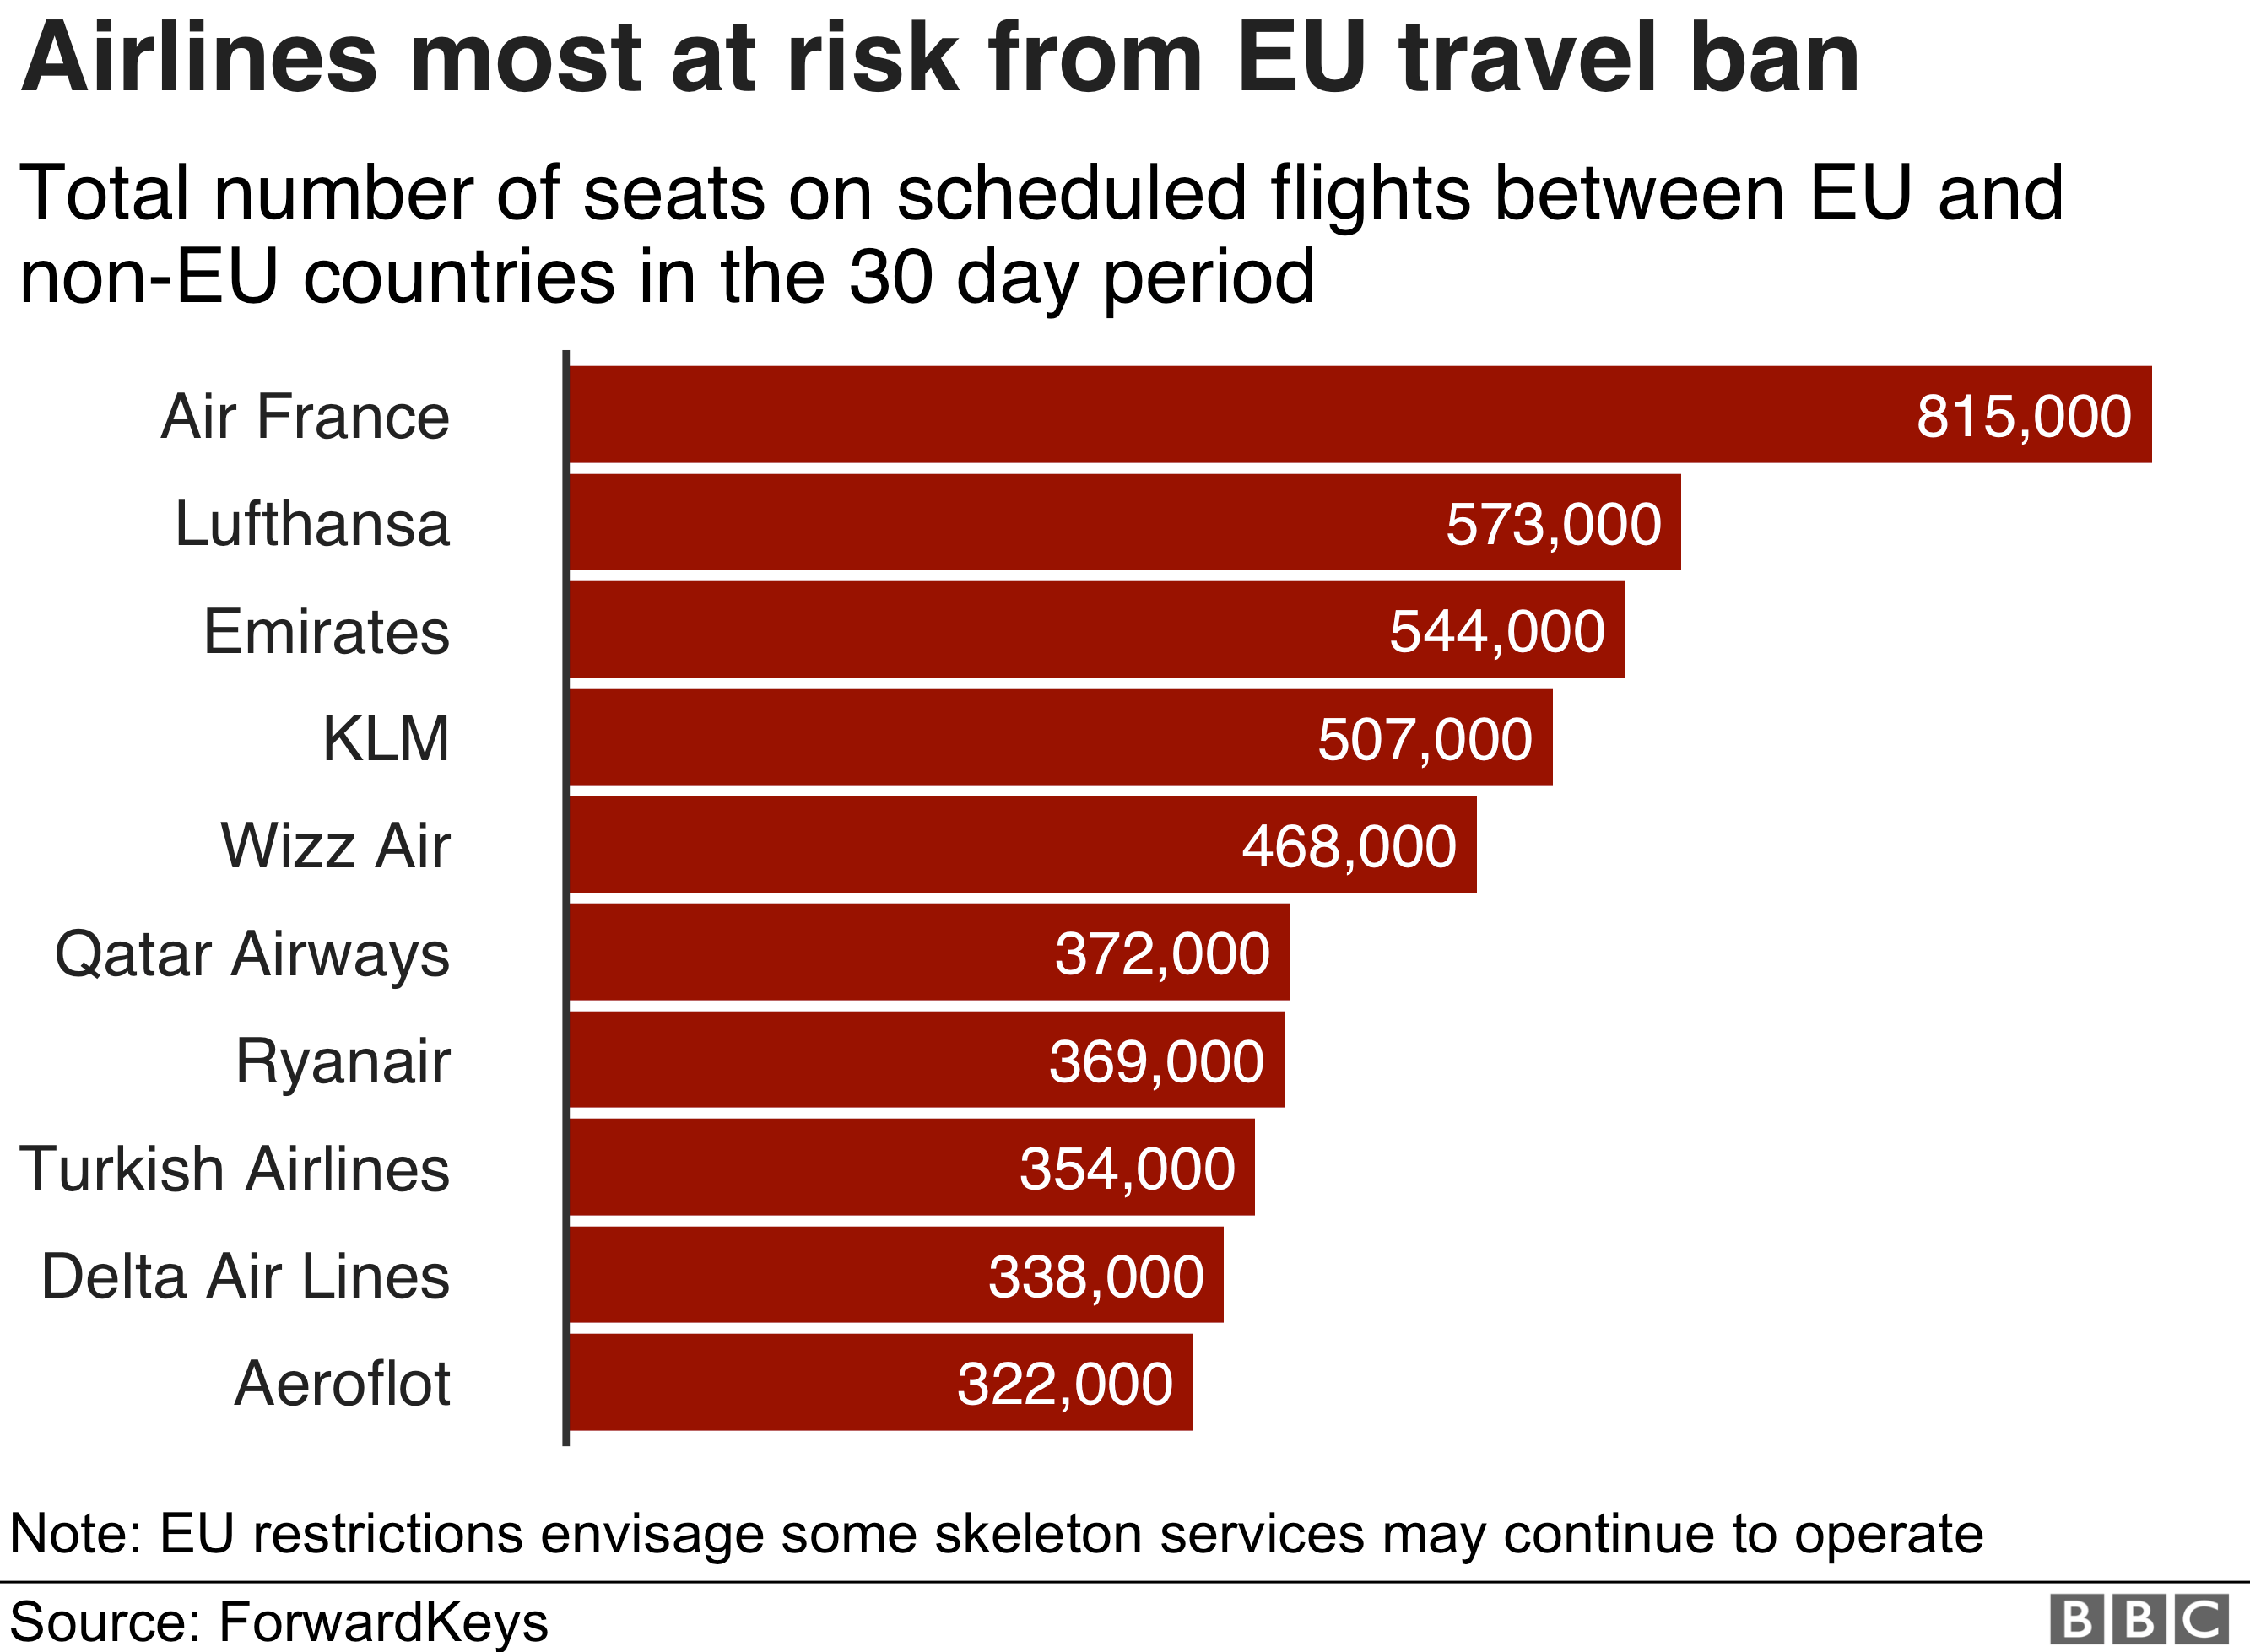 Chart showing airlines at risk from EU travel ban